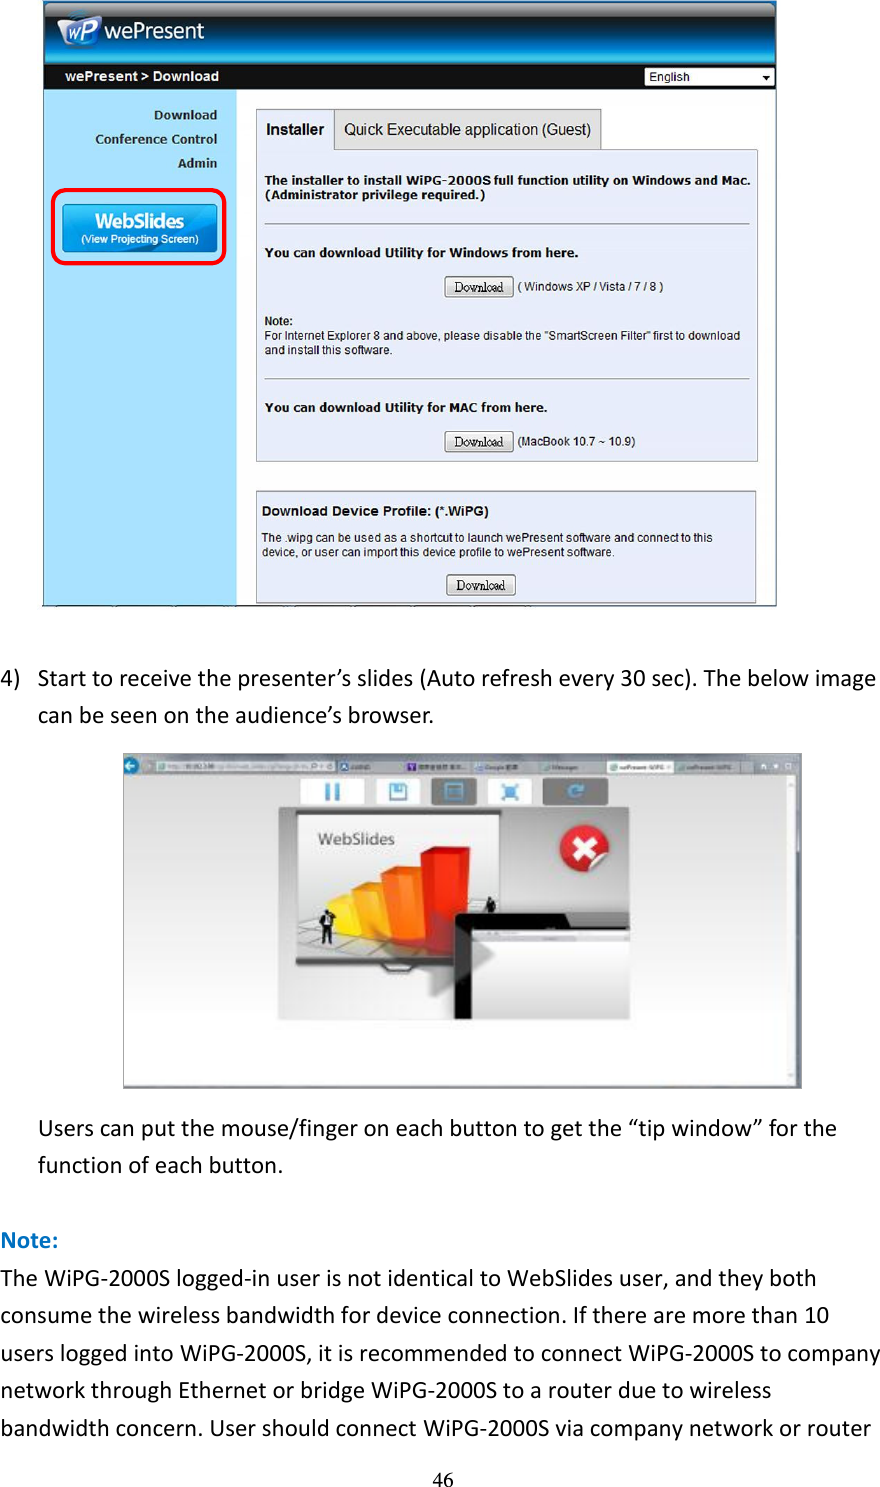   46   4) Start to receive the presenter’s slides (Auto refresh every 30 sec). The below image can be seen on the audience’s browser.    Users can put the mouse/finger on each button to get the “tip window” for the function of each button.    Note: The WiPG-2000S logged-in user is not identical to WebSlides user, and they both consume the wireless bandwidth for device connection. If there are more than 10 users logged into WiPG-2000S, it is recommended to connect WiPG-2000S to company network through Ethernet or bridge WiPG-2000S to a router due to wireless bandwidth concern. User should connect WiPG-2000S via company network or router 